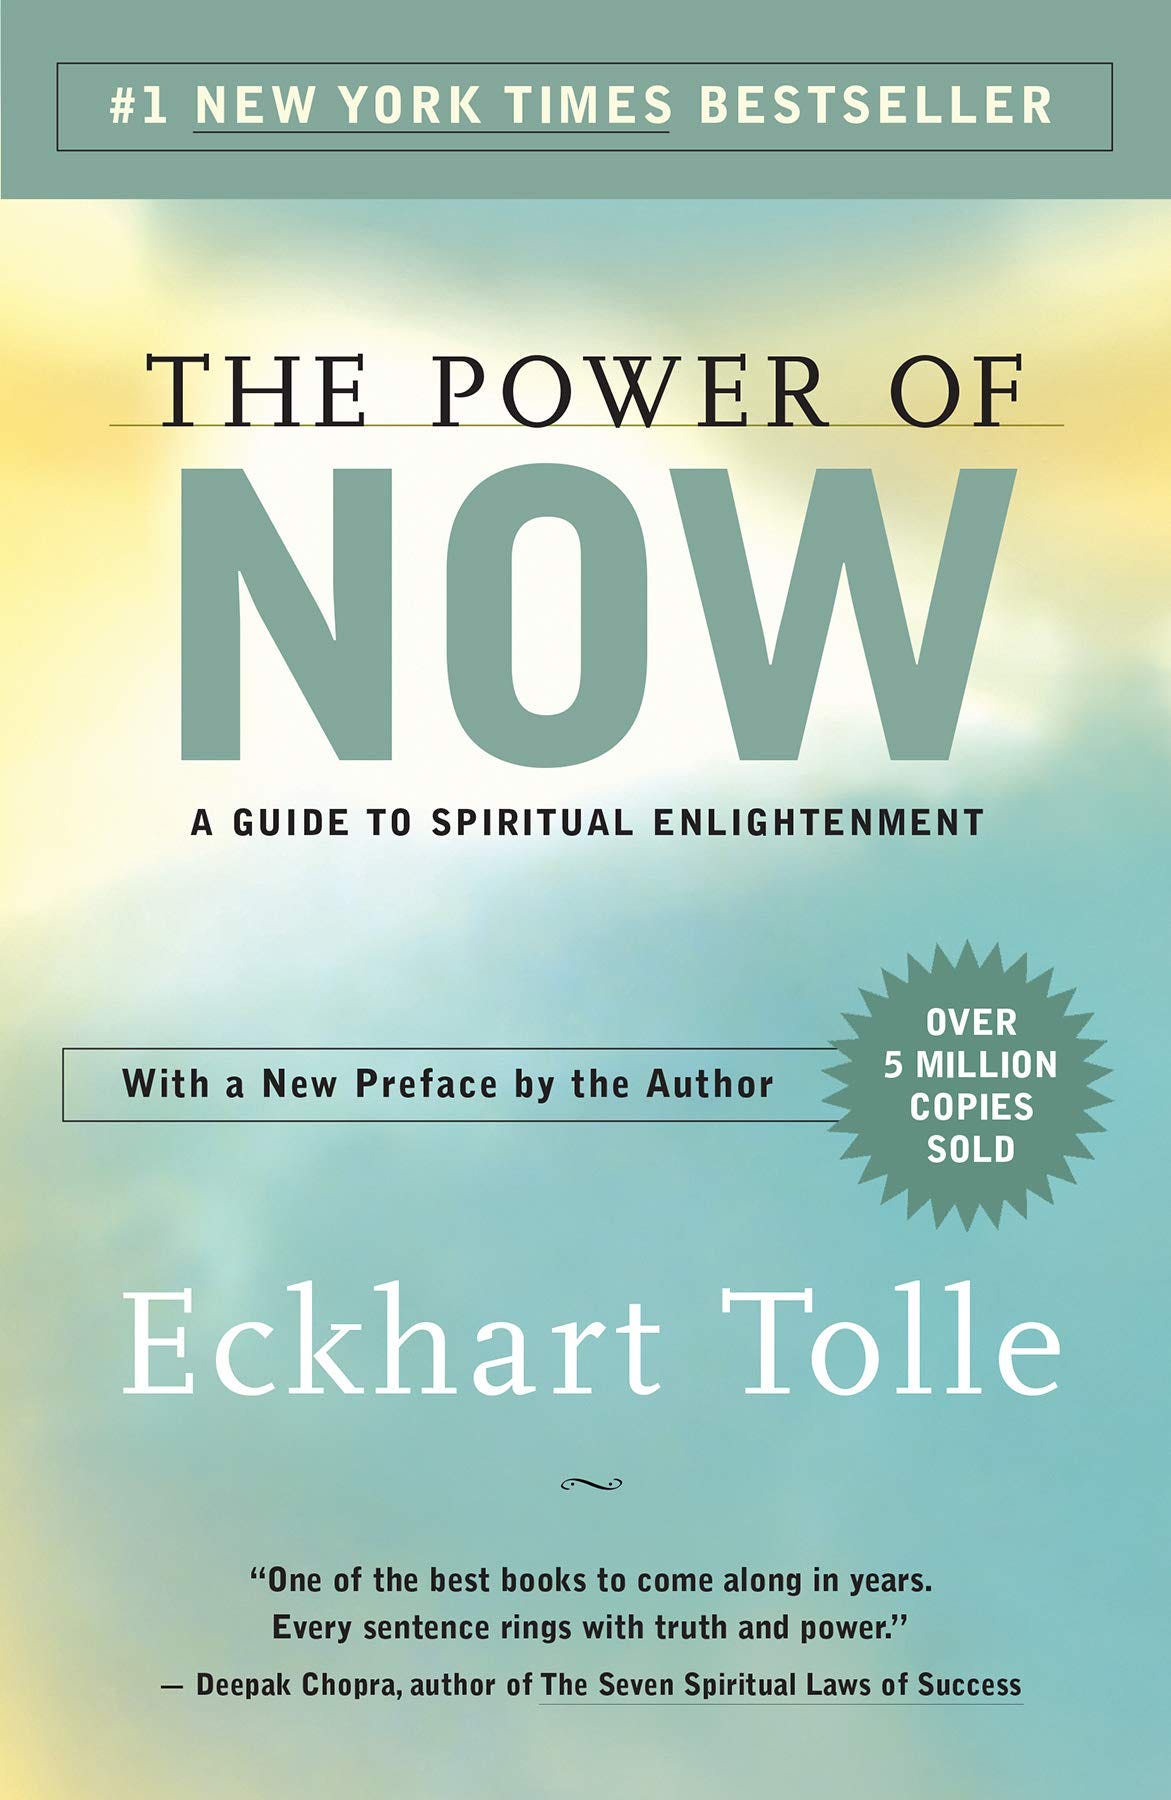 The Power of Now: A Guide to Spiritual Enlightenment: Tolle, Eckhart:  9781577314806: Amazon.com: Books